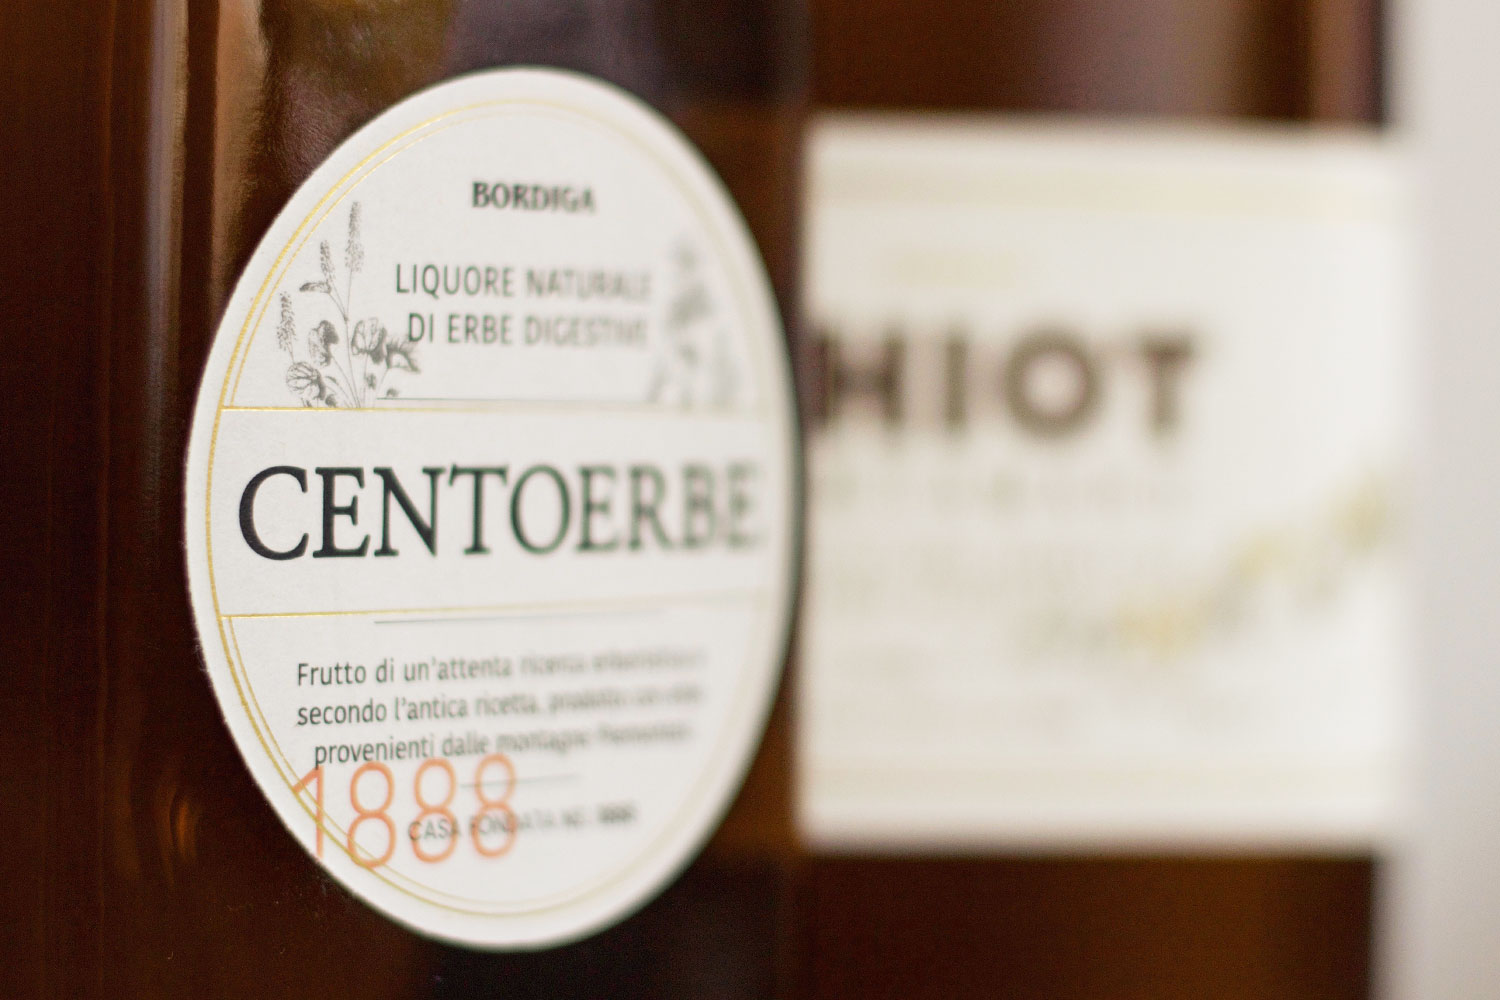 Centoerbe and Chiot label design